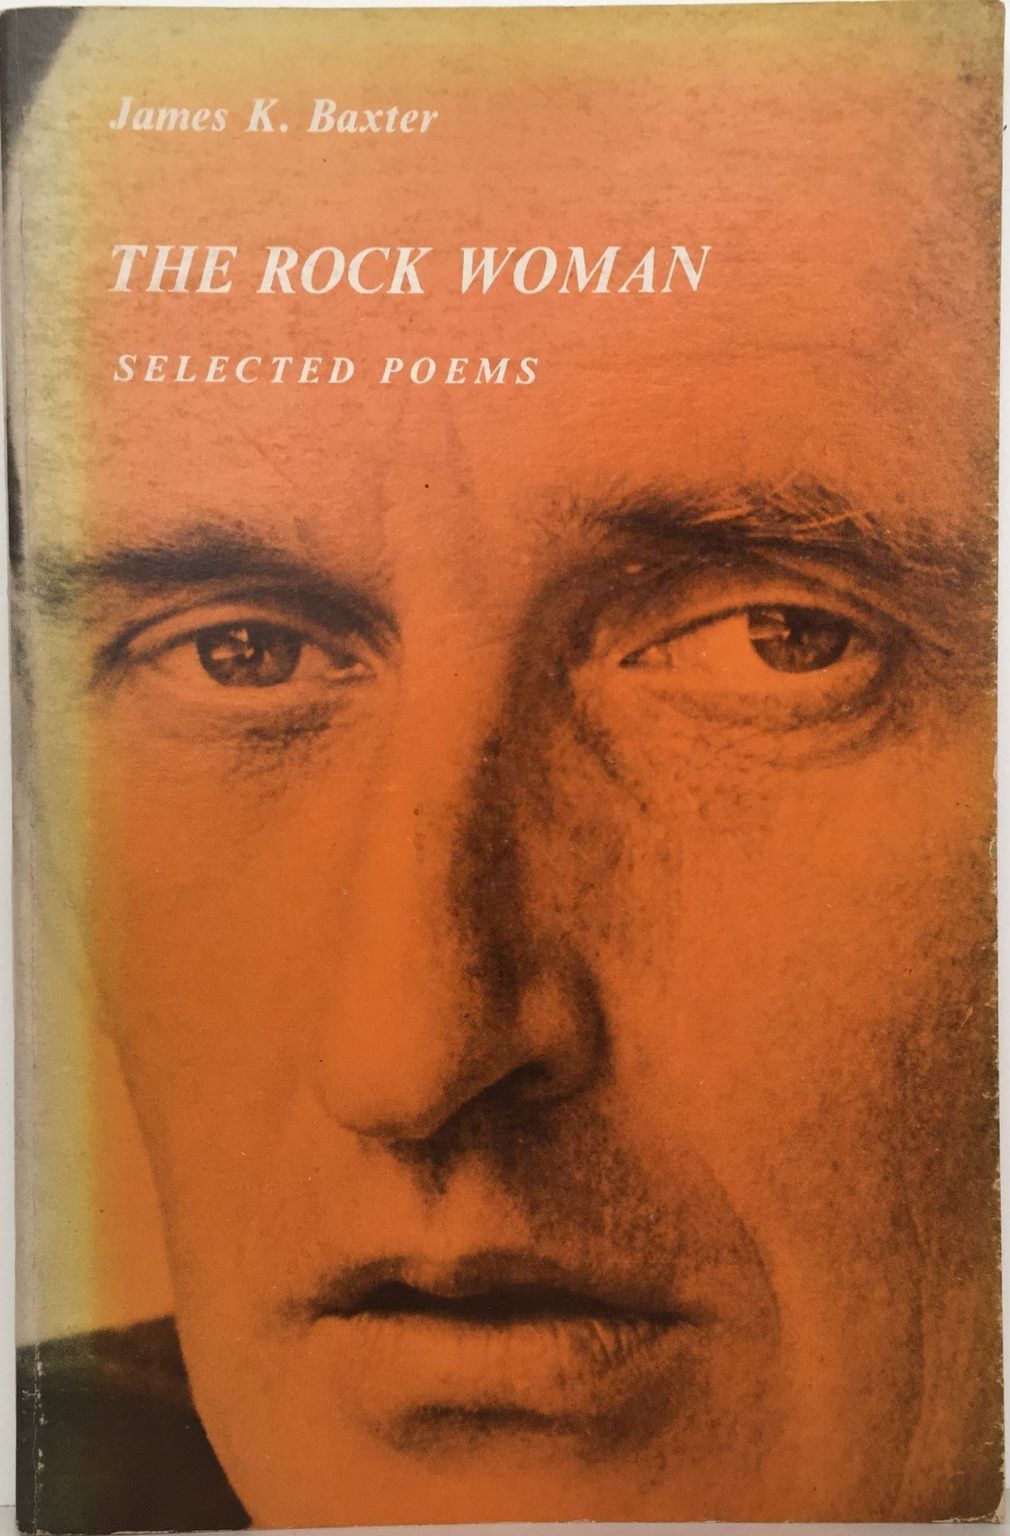 THE ROCK WOMAN: Selected Poems